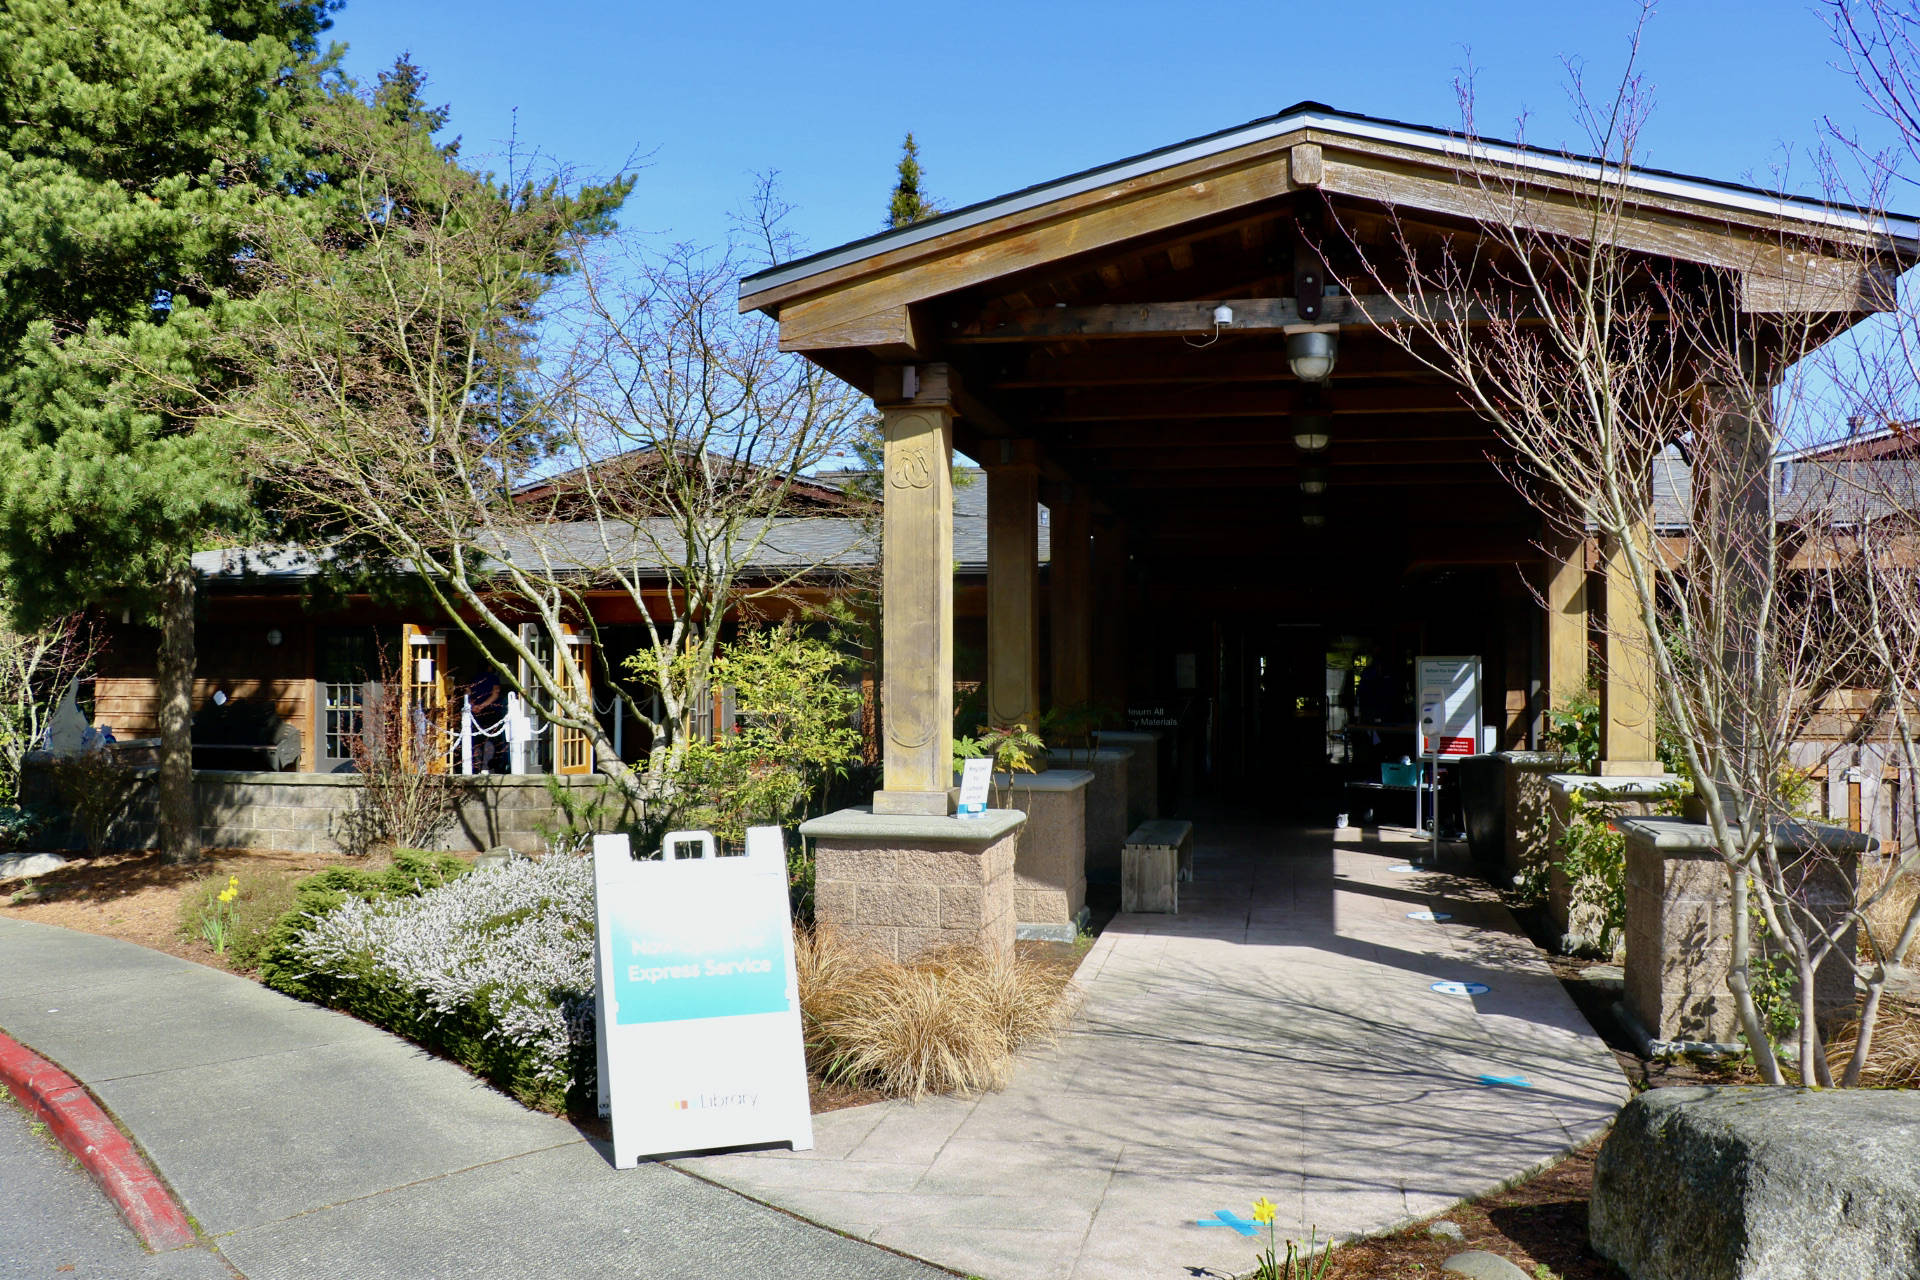 The Poulsbo Library is now open after being closed for over a year due to the COVID-19 pandemic and renovations at the library. File Photo